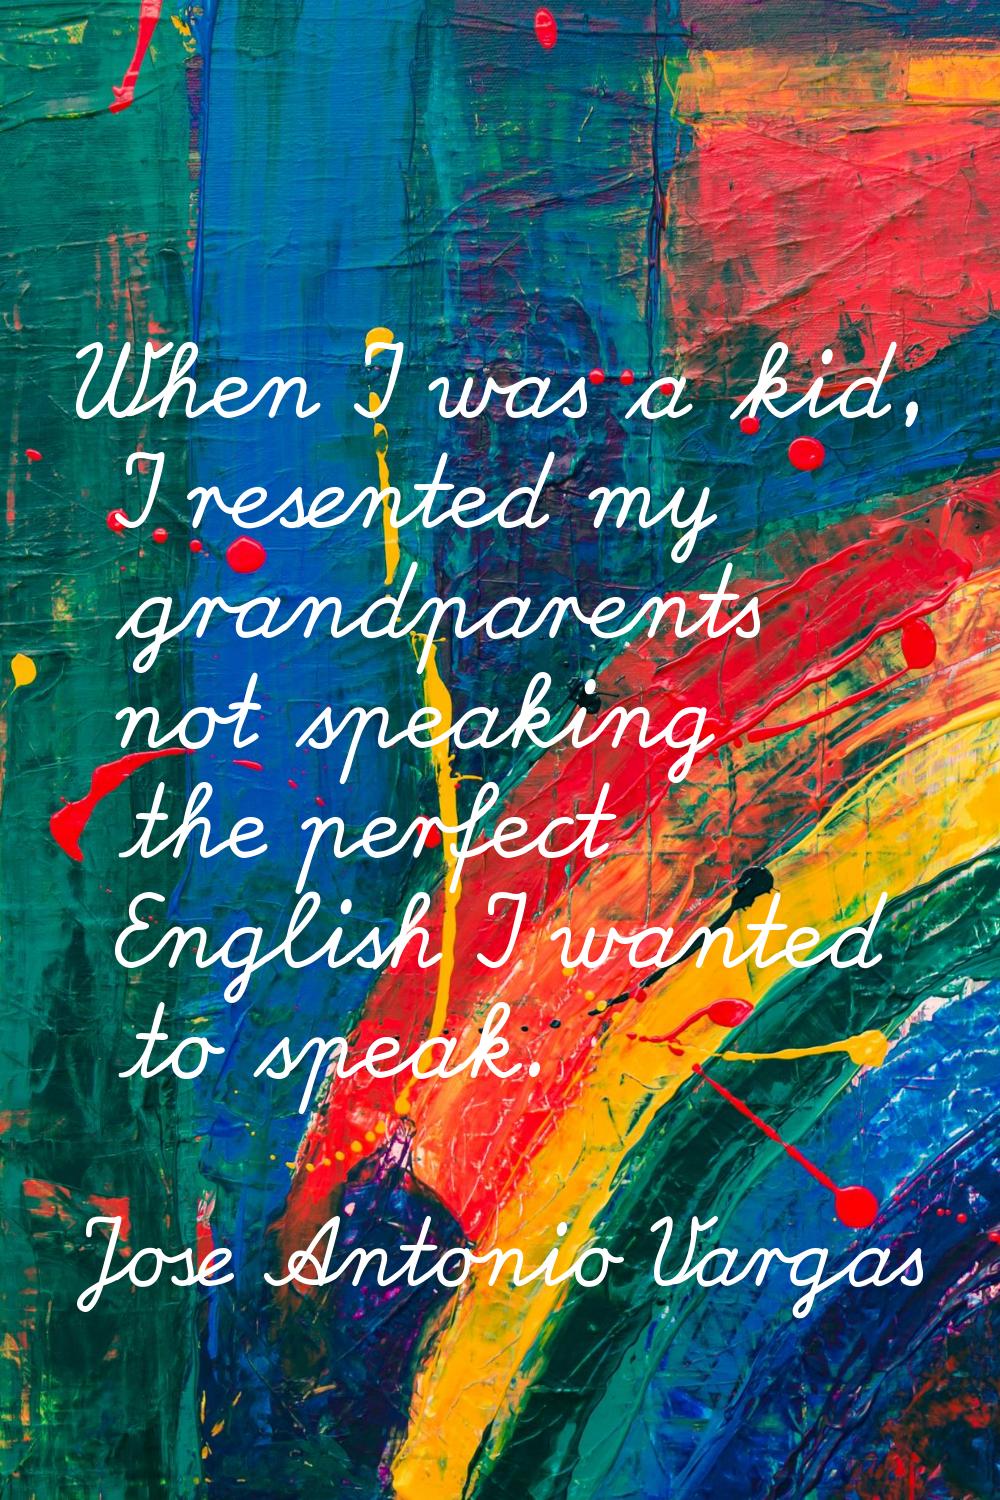 When I was a kid, I resented my grandparents not speaking the perfect English I wanted to speak.